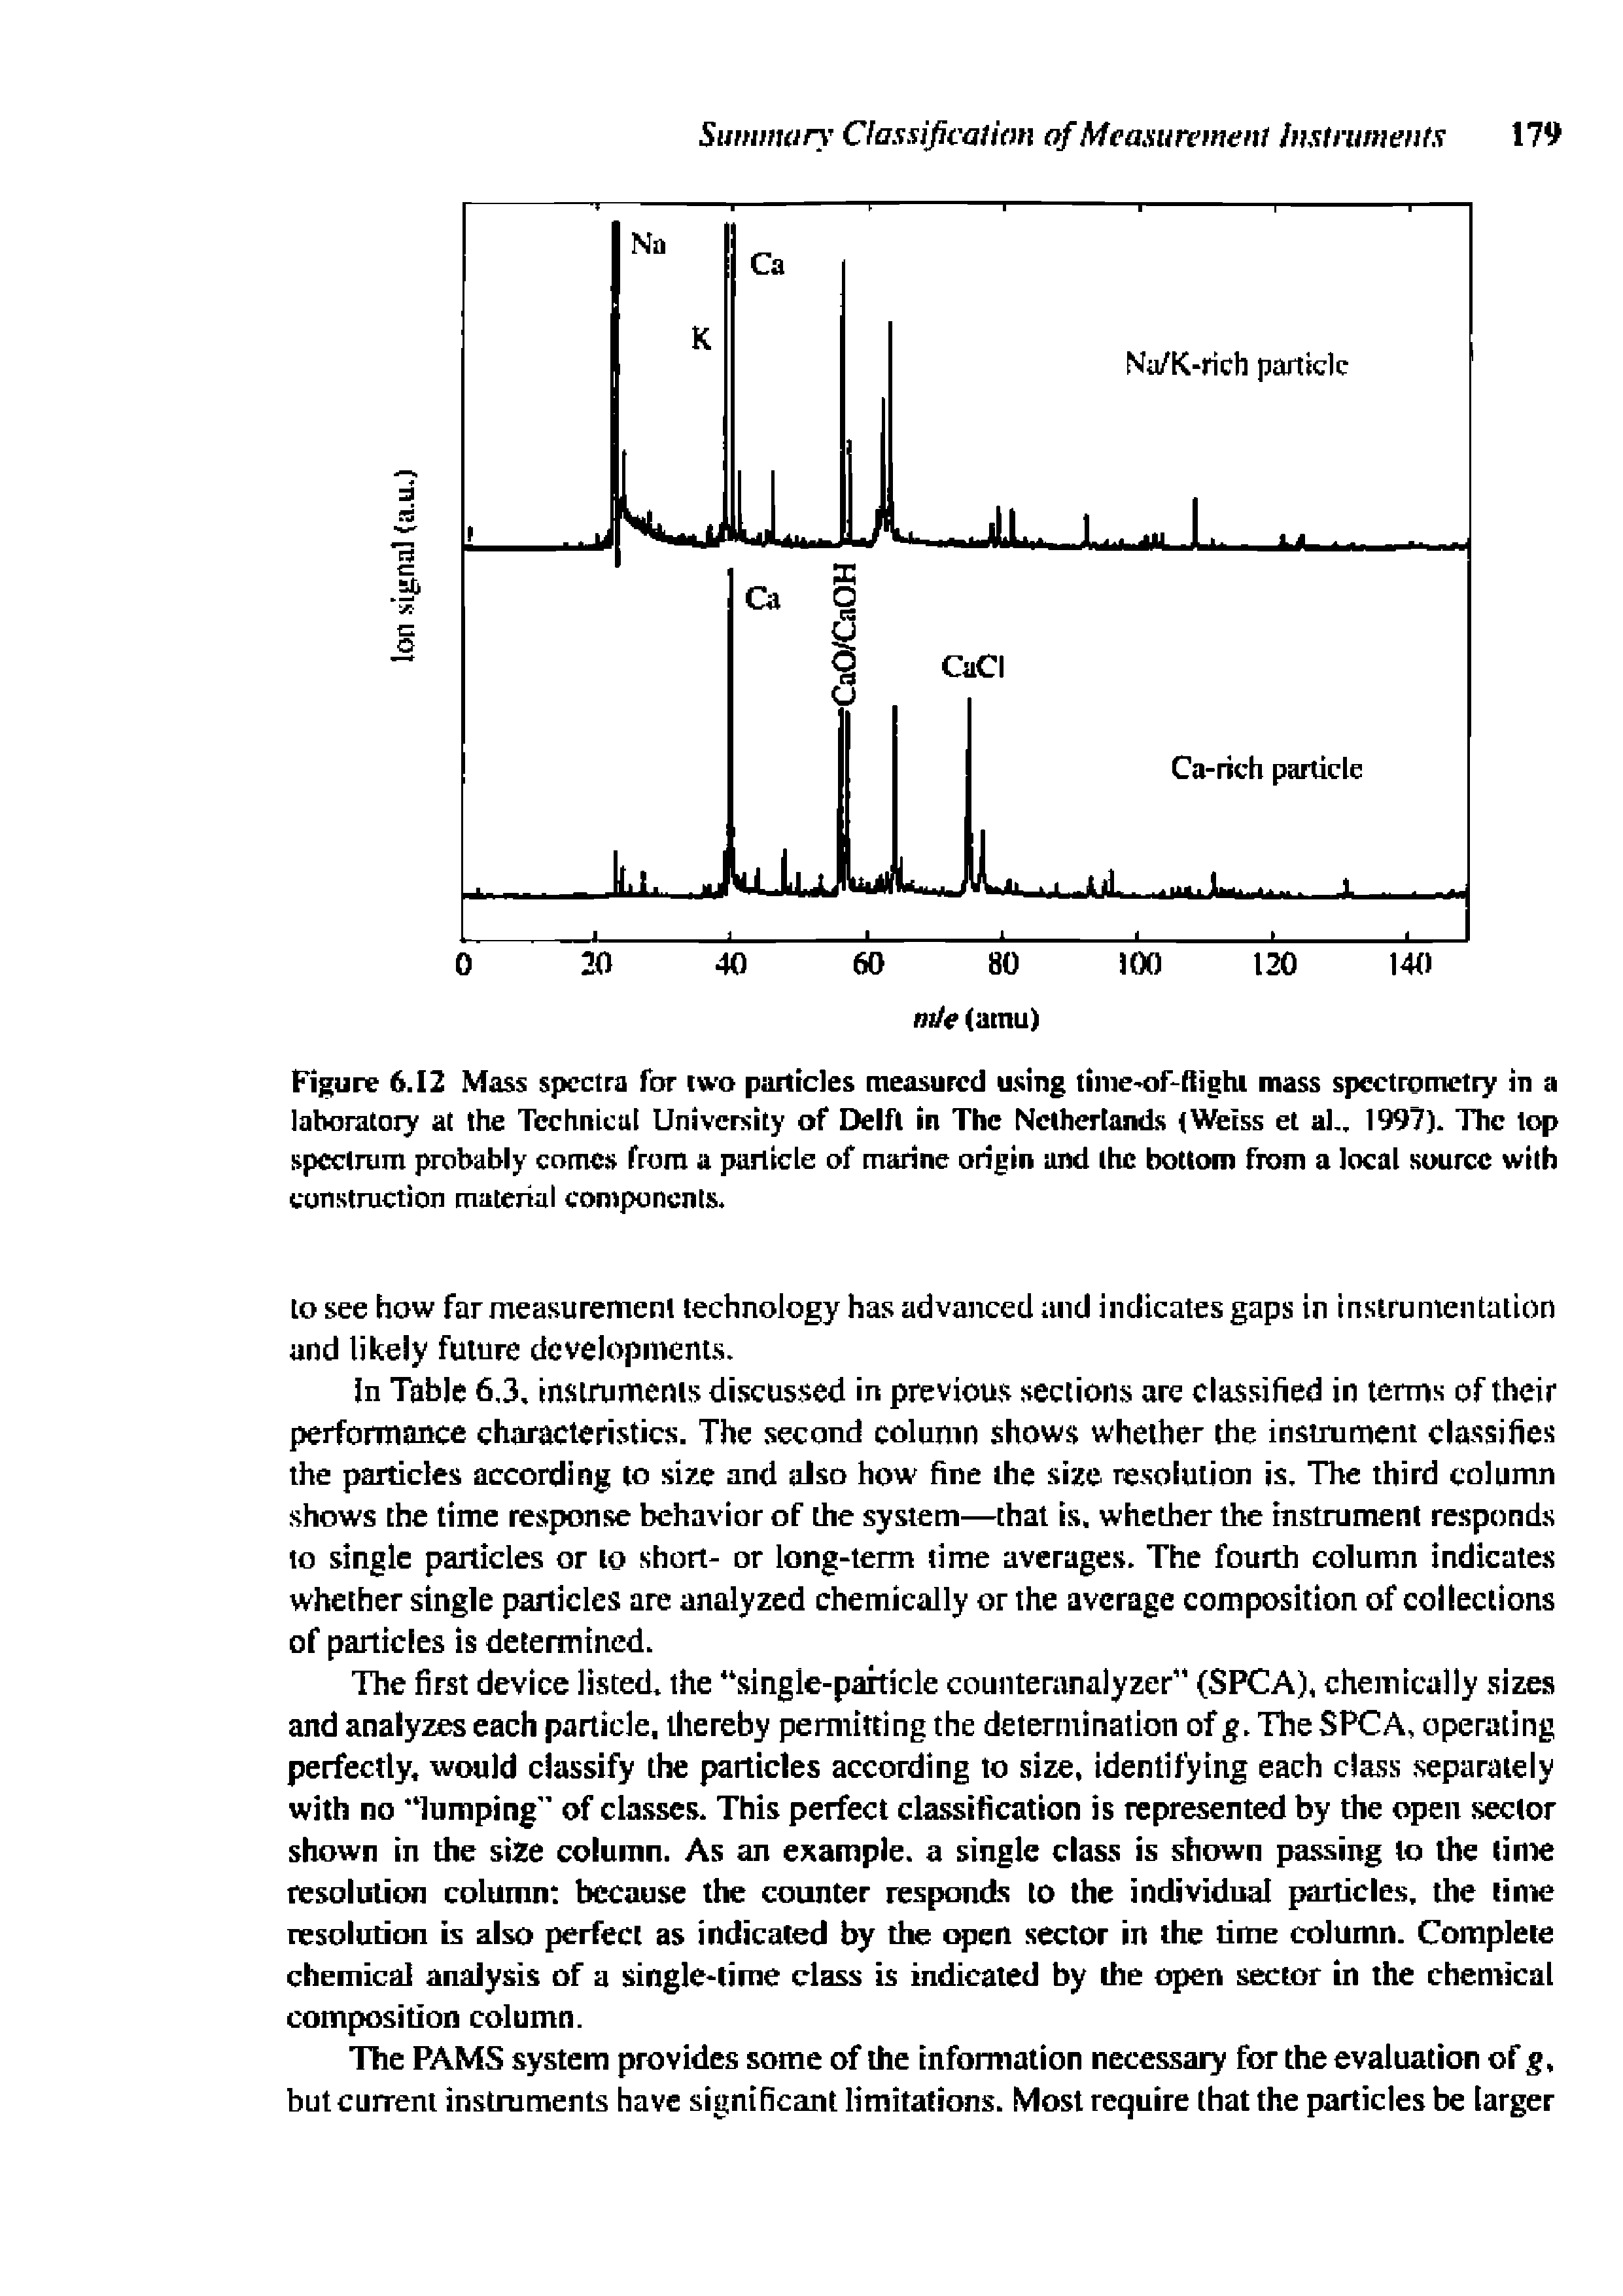 Figure 6.12 Mass spectra for two particles measured using time oFnighi mass spectrometry in a laboratory at the Technical University of Delft in The Netherlands (Weiss et al 1997). The lop spectrum probably comes from a particle of marine origin and the bottom from a local source with construction material components.